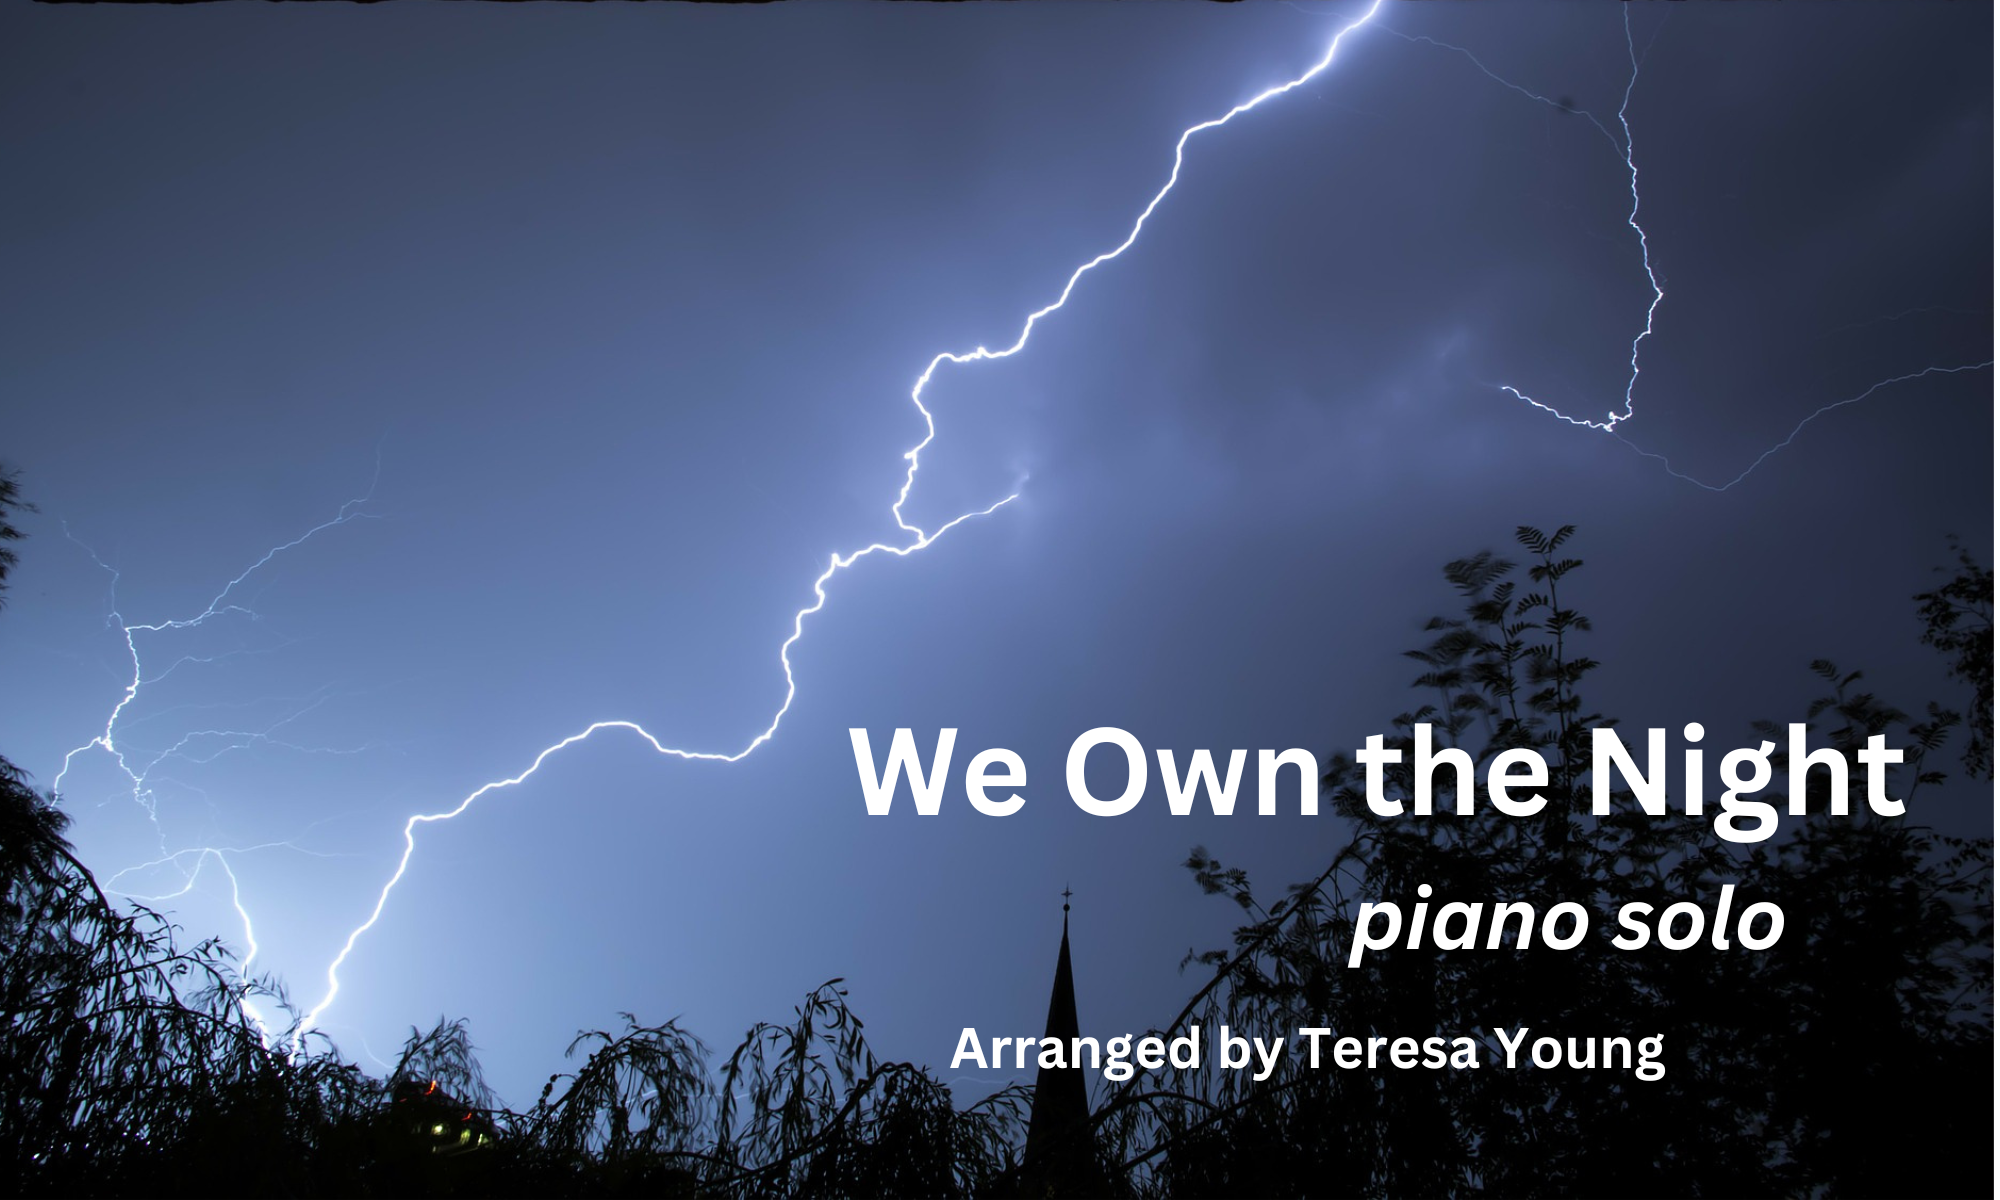 We Own the Night, piano solo, arranged by Teresa Young